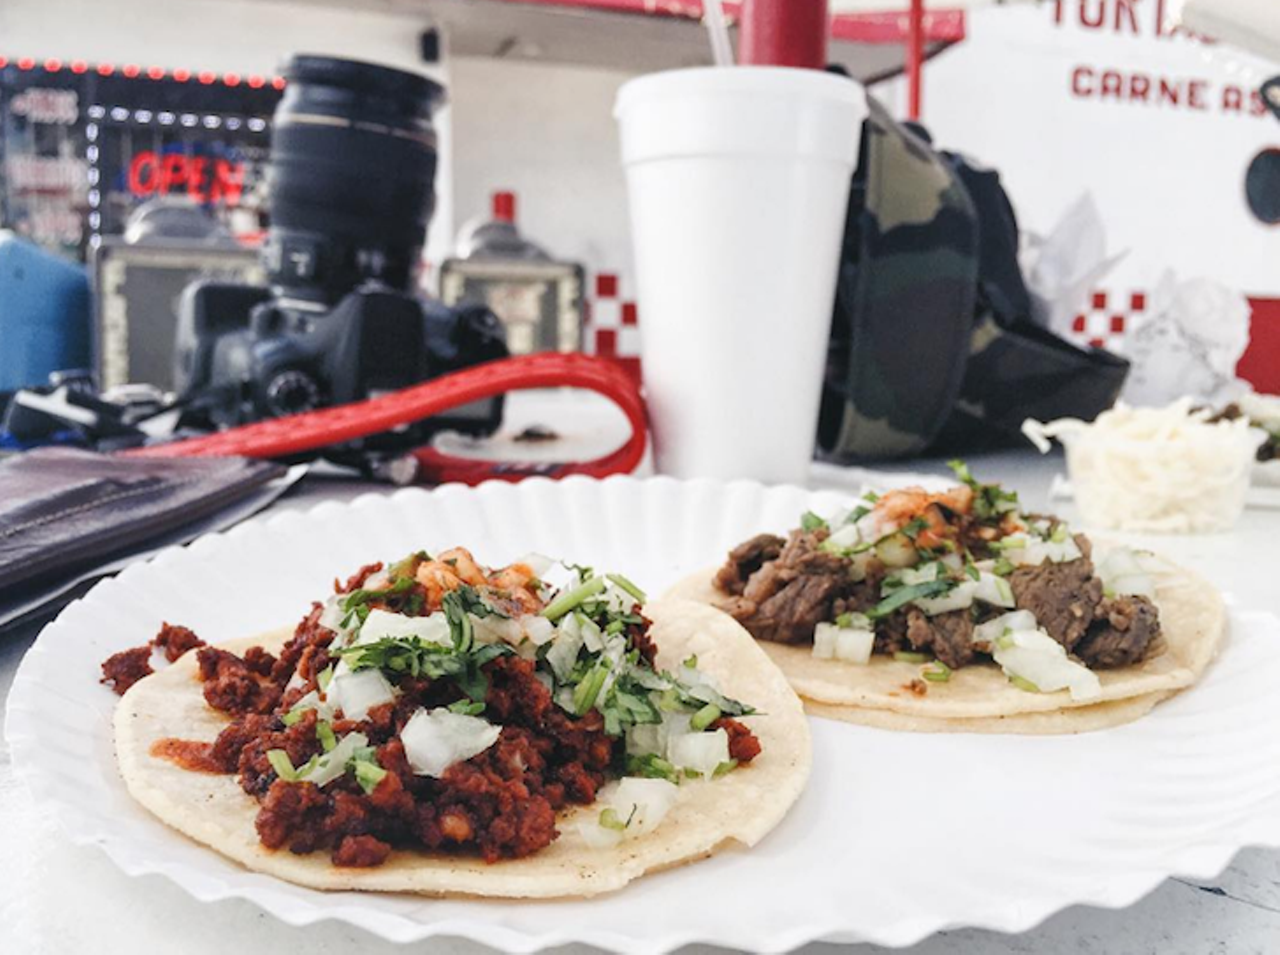 Tortas El Rey
6151 S Orange Blossom Trail, Orlando, (407) 850-6980
Tacos that come from a remodeled Checkers drive-thru may sound sketchy, especially when they are offered for $0.50 on Tuesdays, but these authentic Mexican street tacos are not something to miss. 
Photo via waltonscastro/Instagram